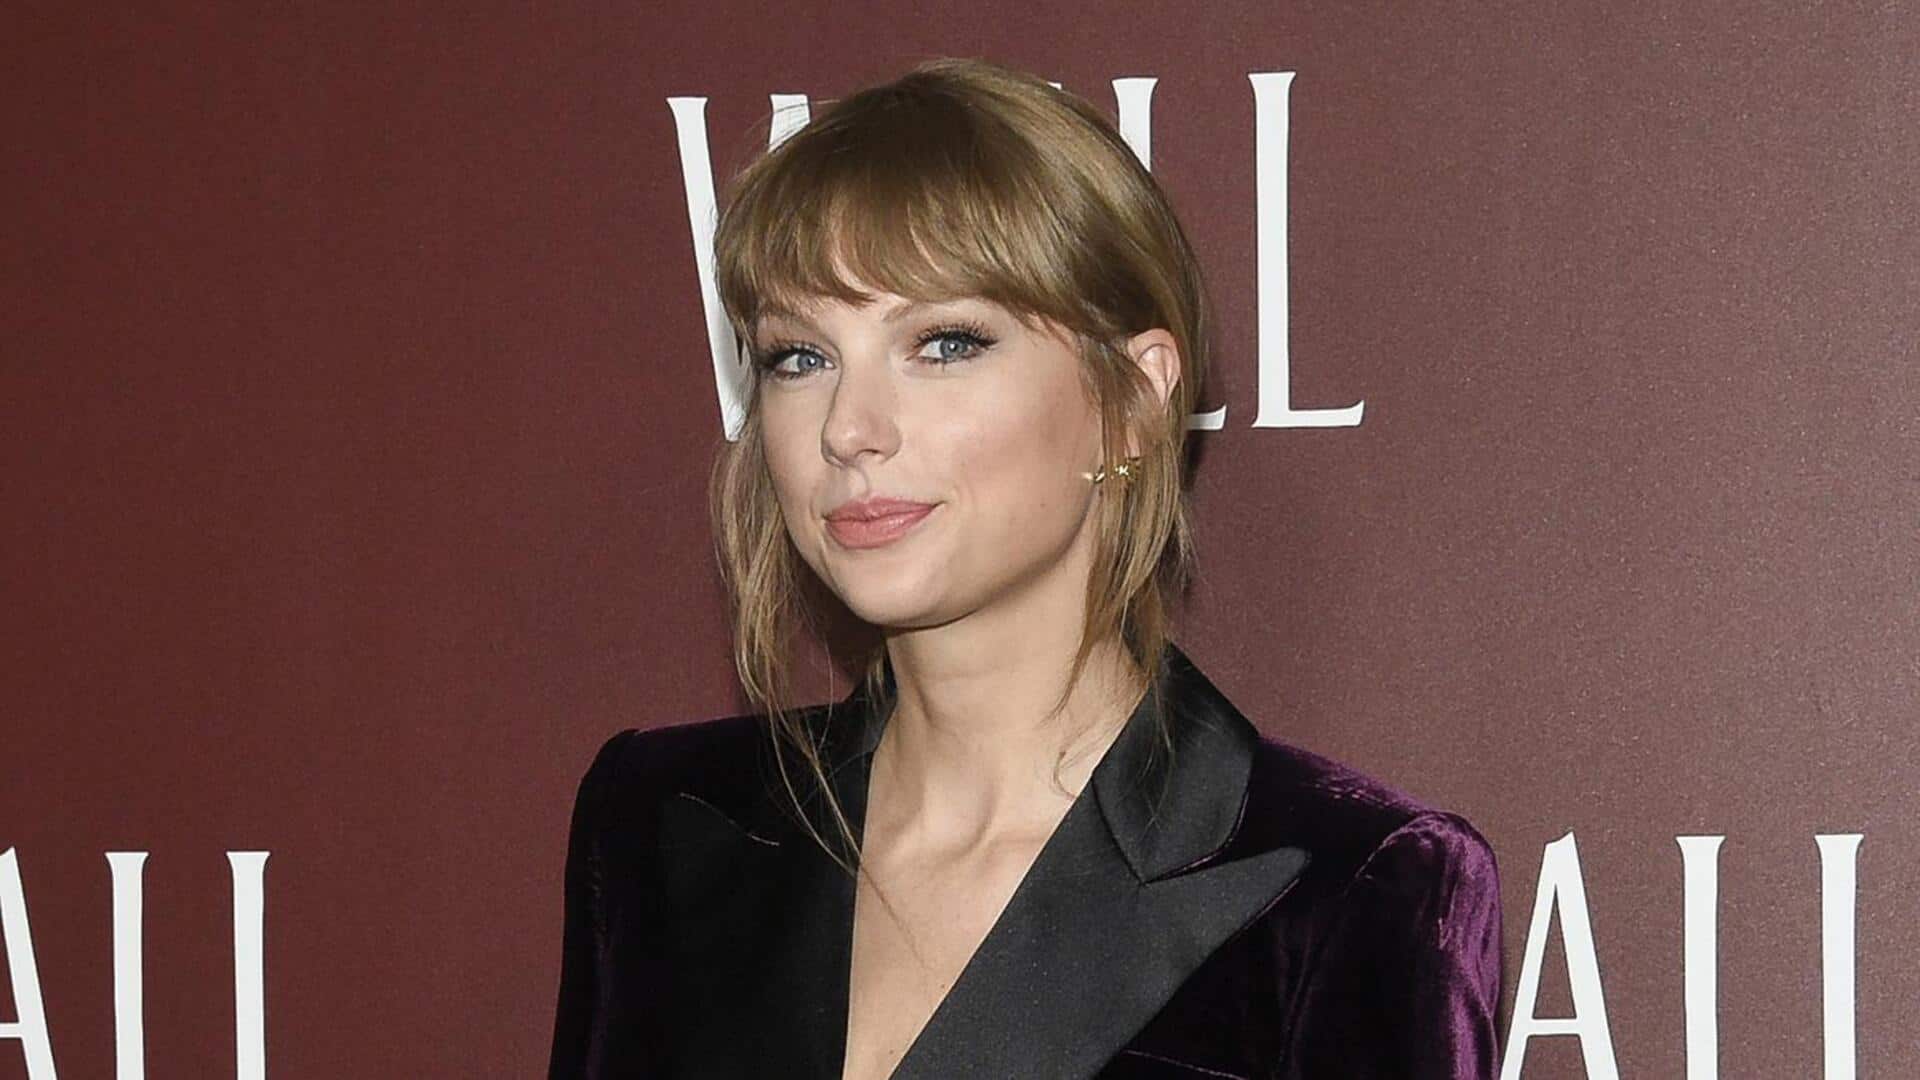 Private jet tracker provokes the ire of Taylor Swift